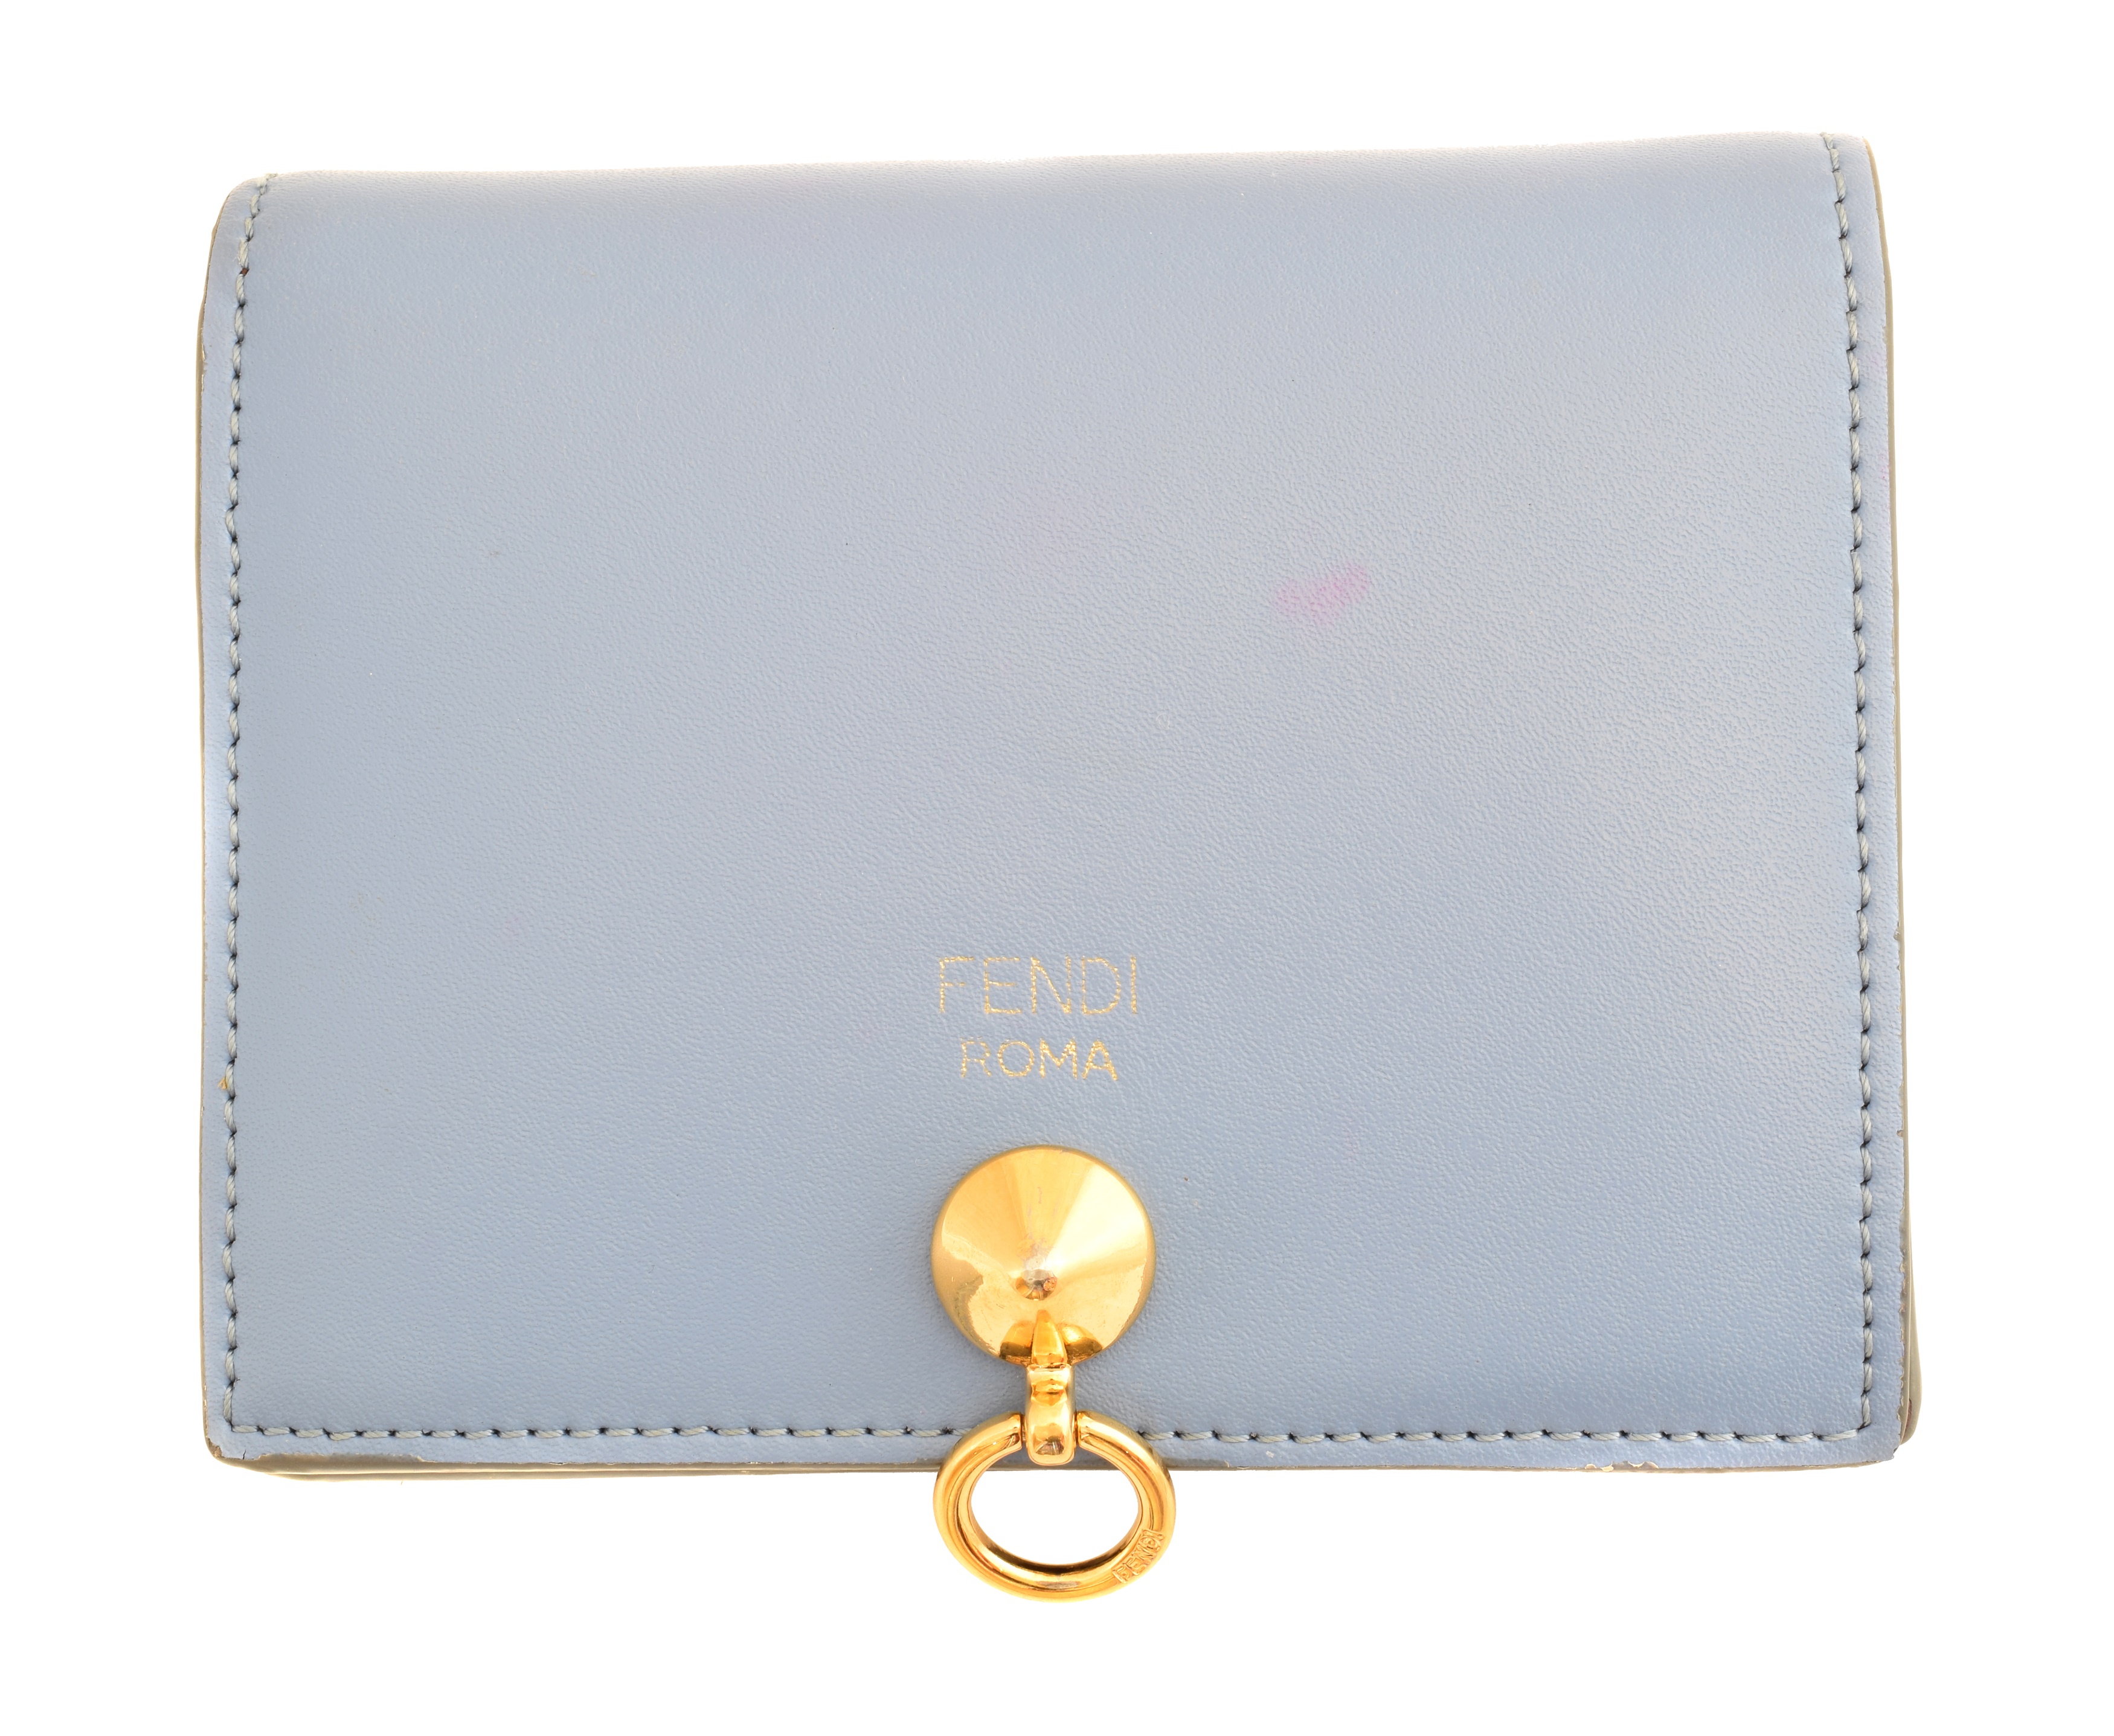 A Fendi Bifold Wallet, the light blue calf leather exterior with gold-tone hardware and purple smooth leather interior.